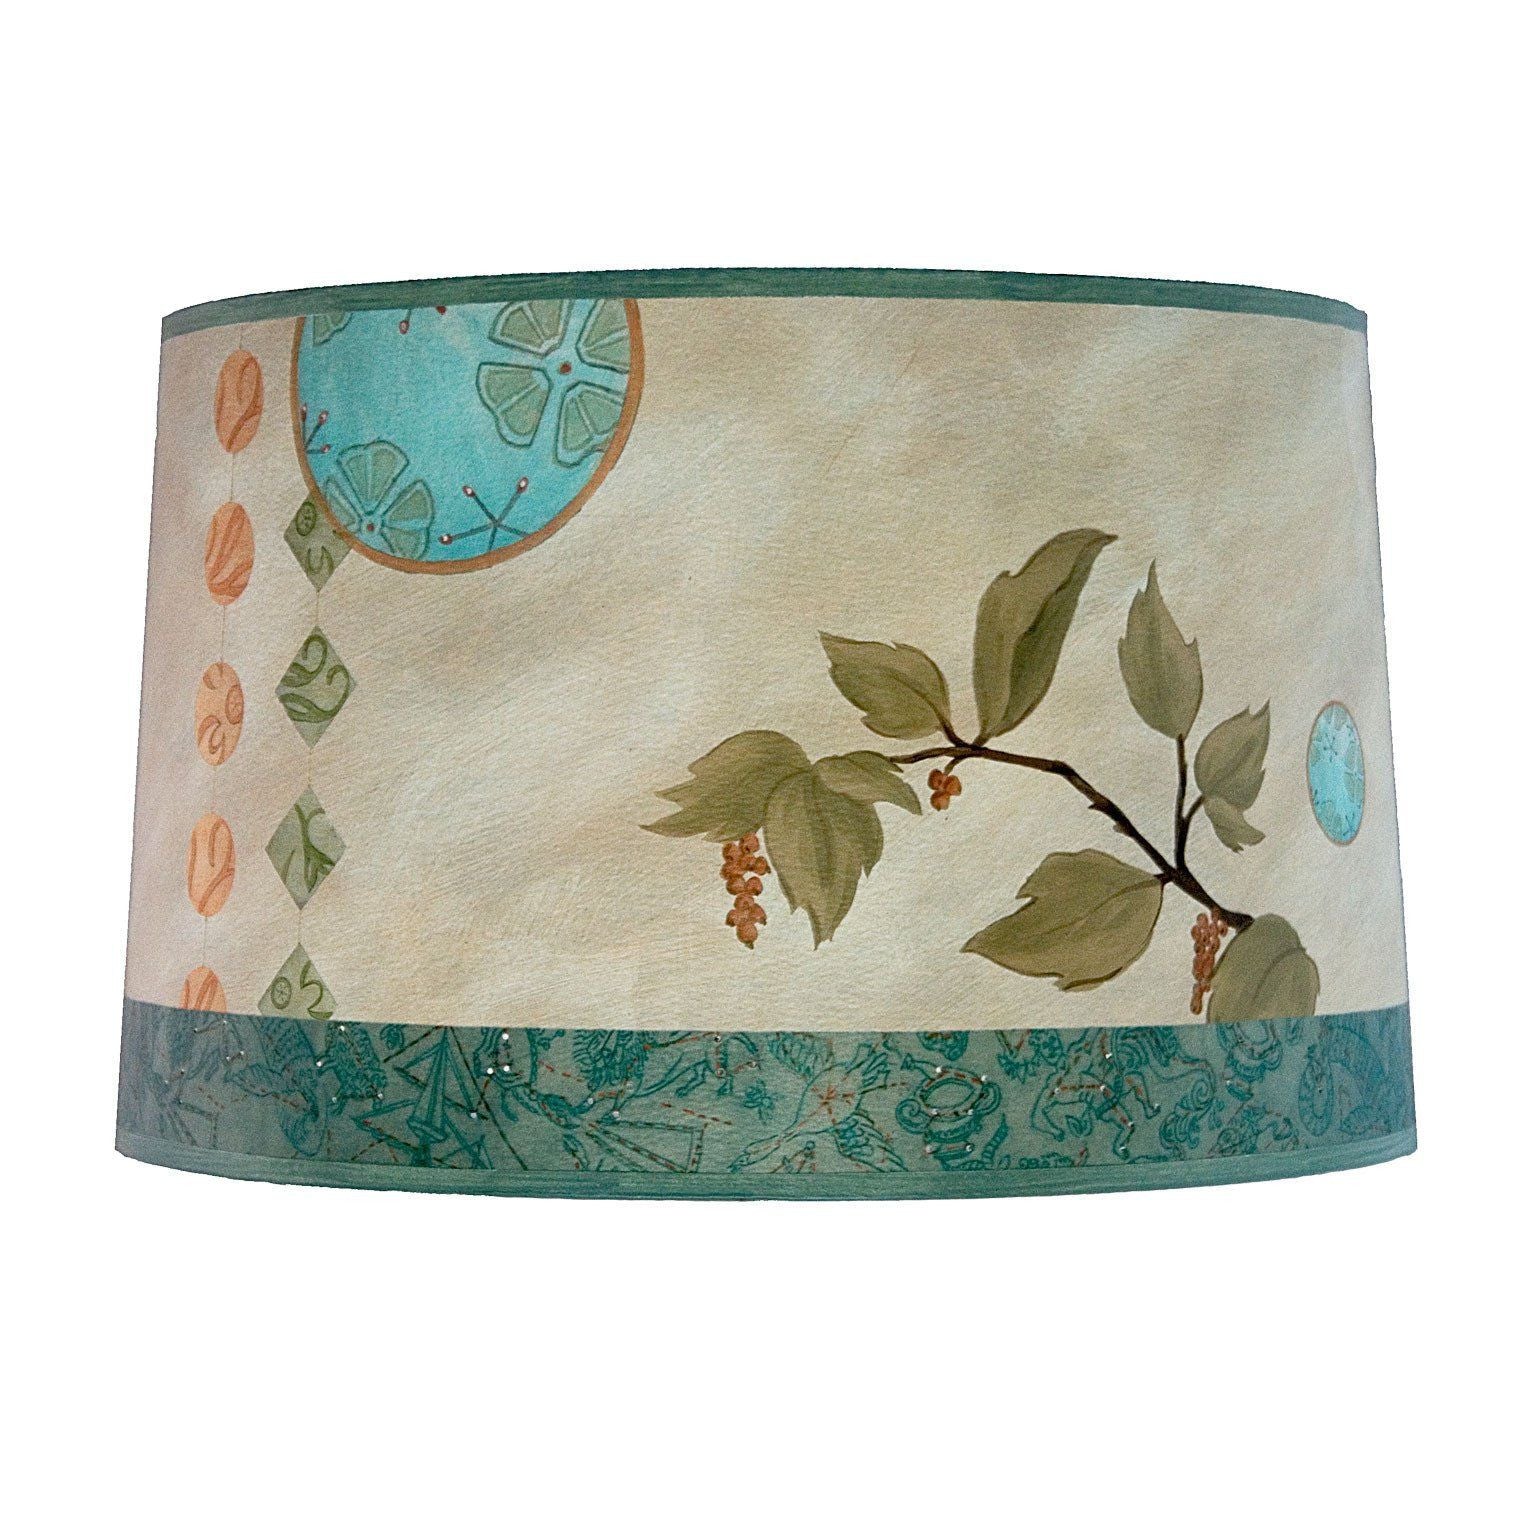 Janna Ugone & Co Lamp Shades Large Drum Lamp Shade in Celestial Leaf